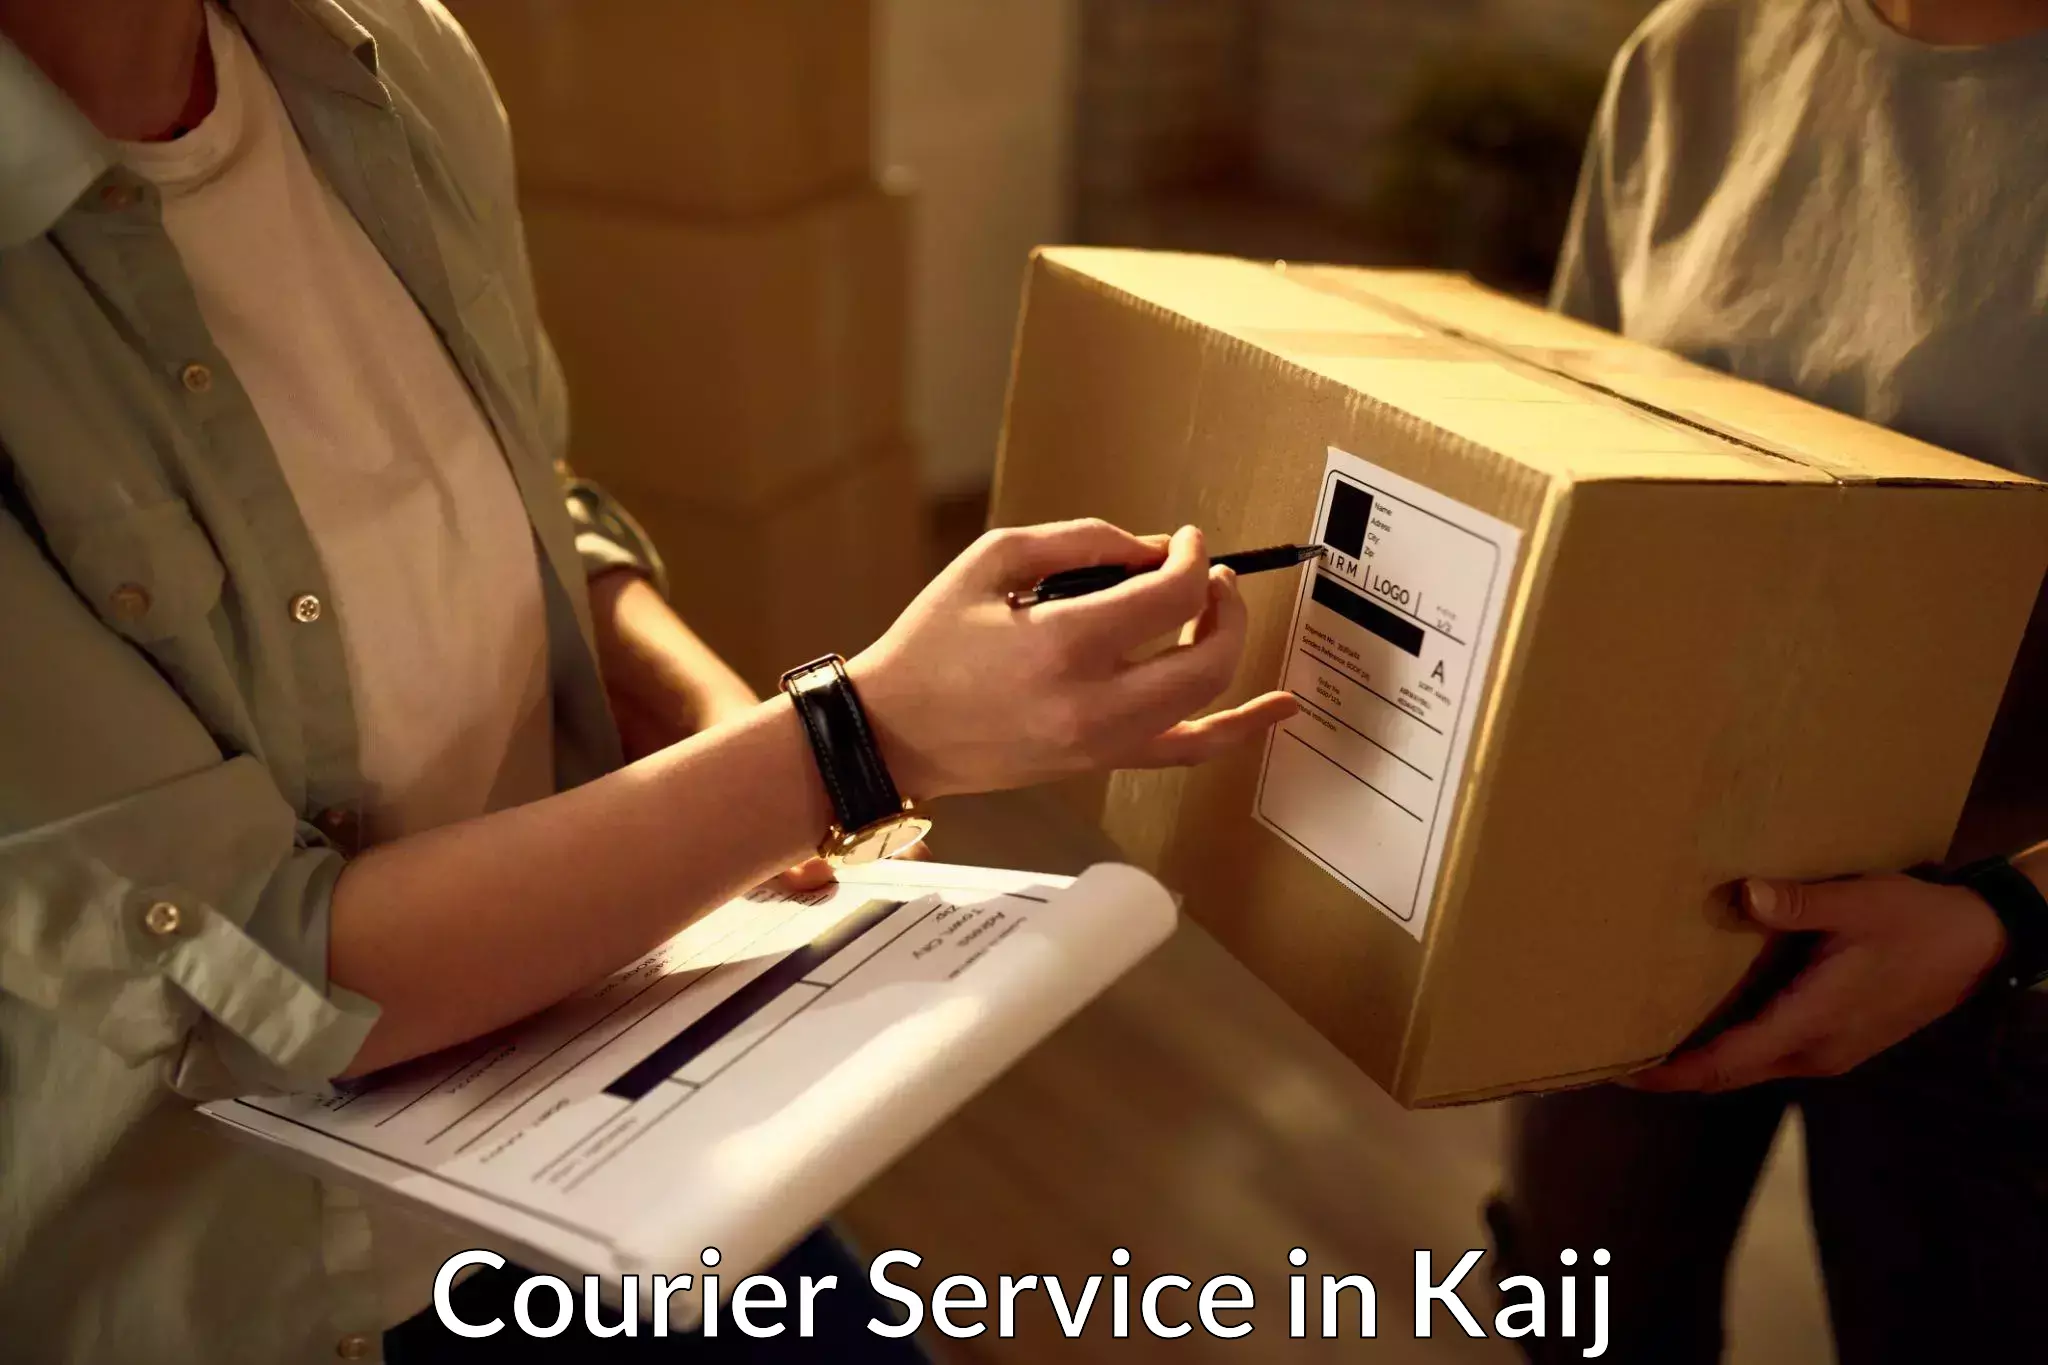 Scheduled delivery in Kaij